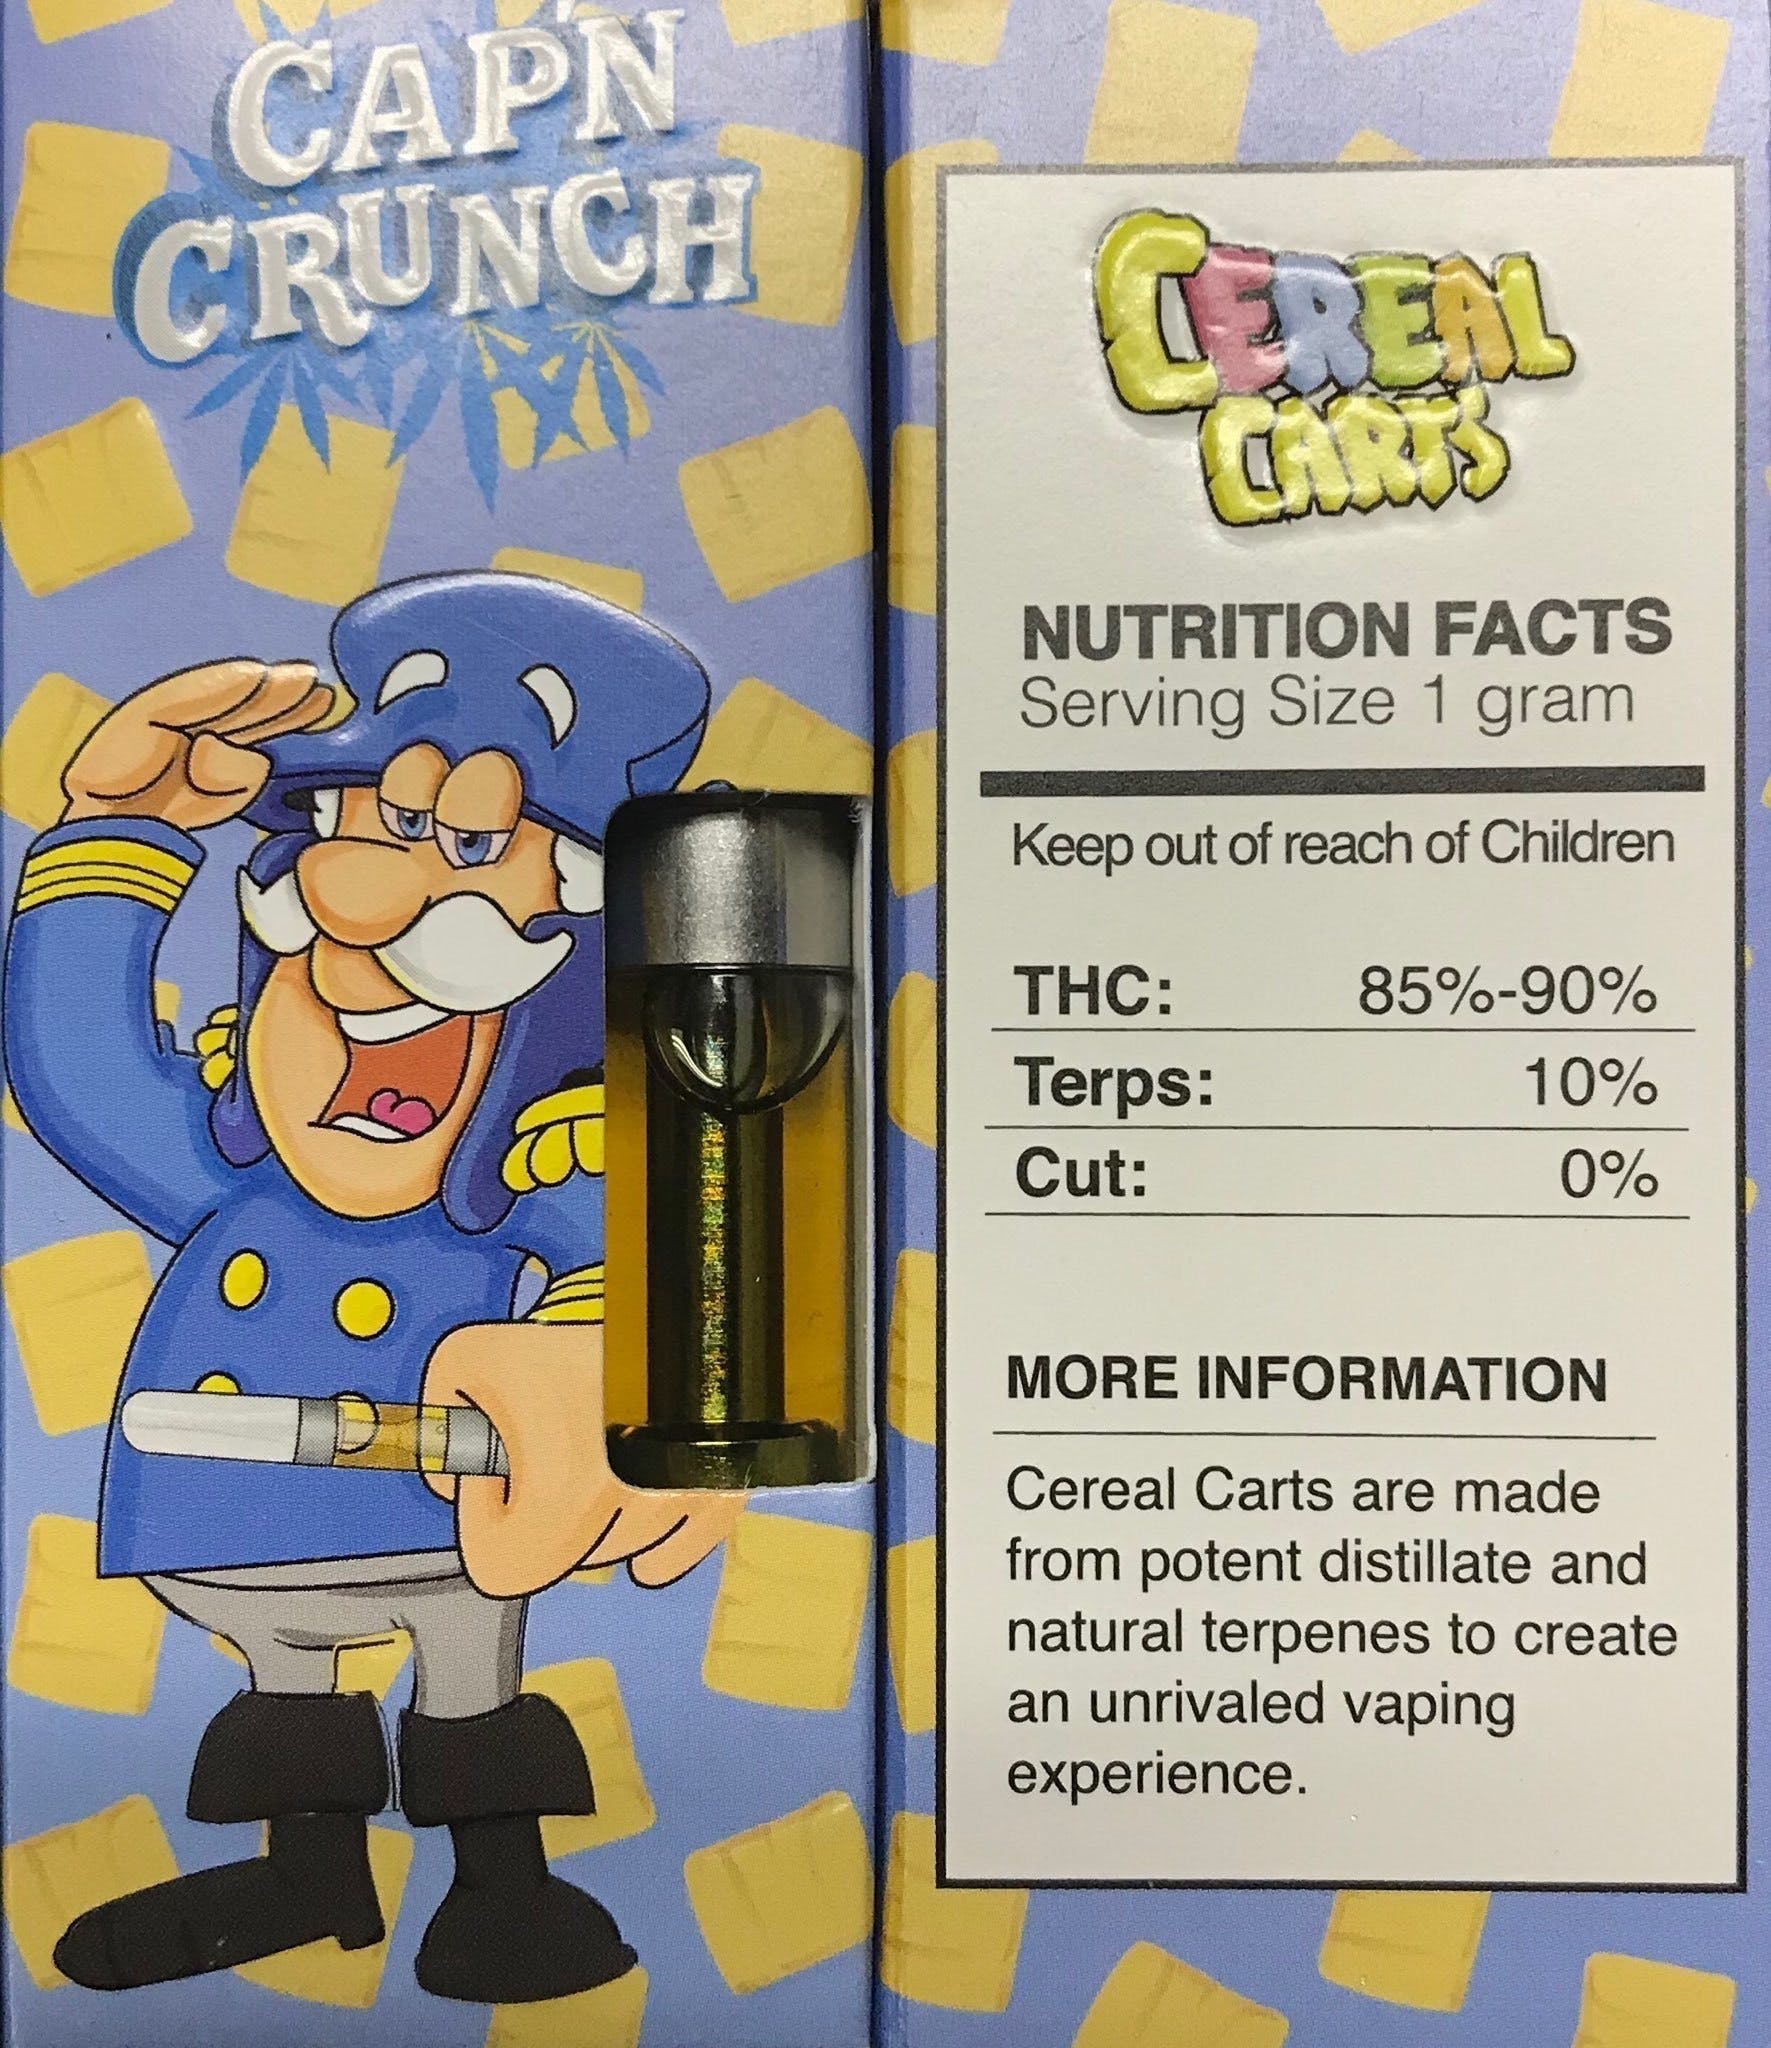 concentrate-cereal-carts-capn-crunch